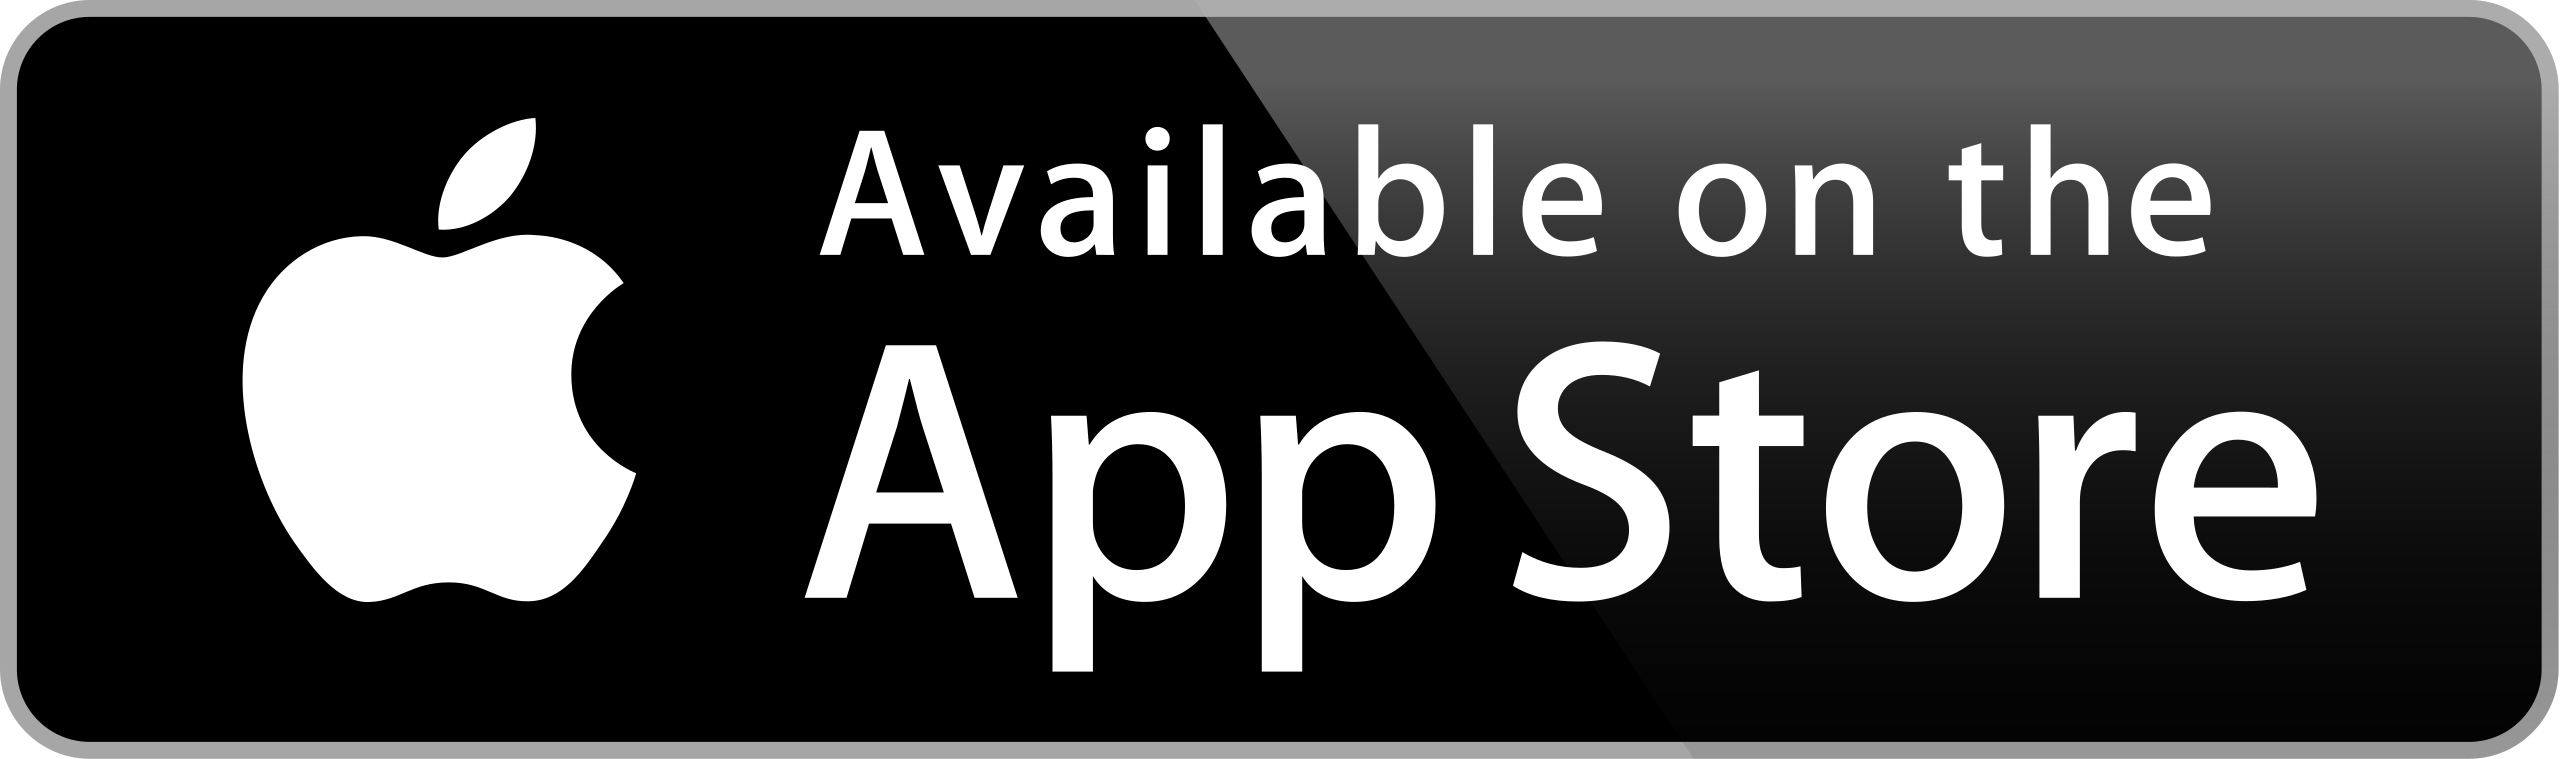 Available_on_the_App_Store_(black)_SVG.svg